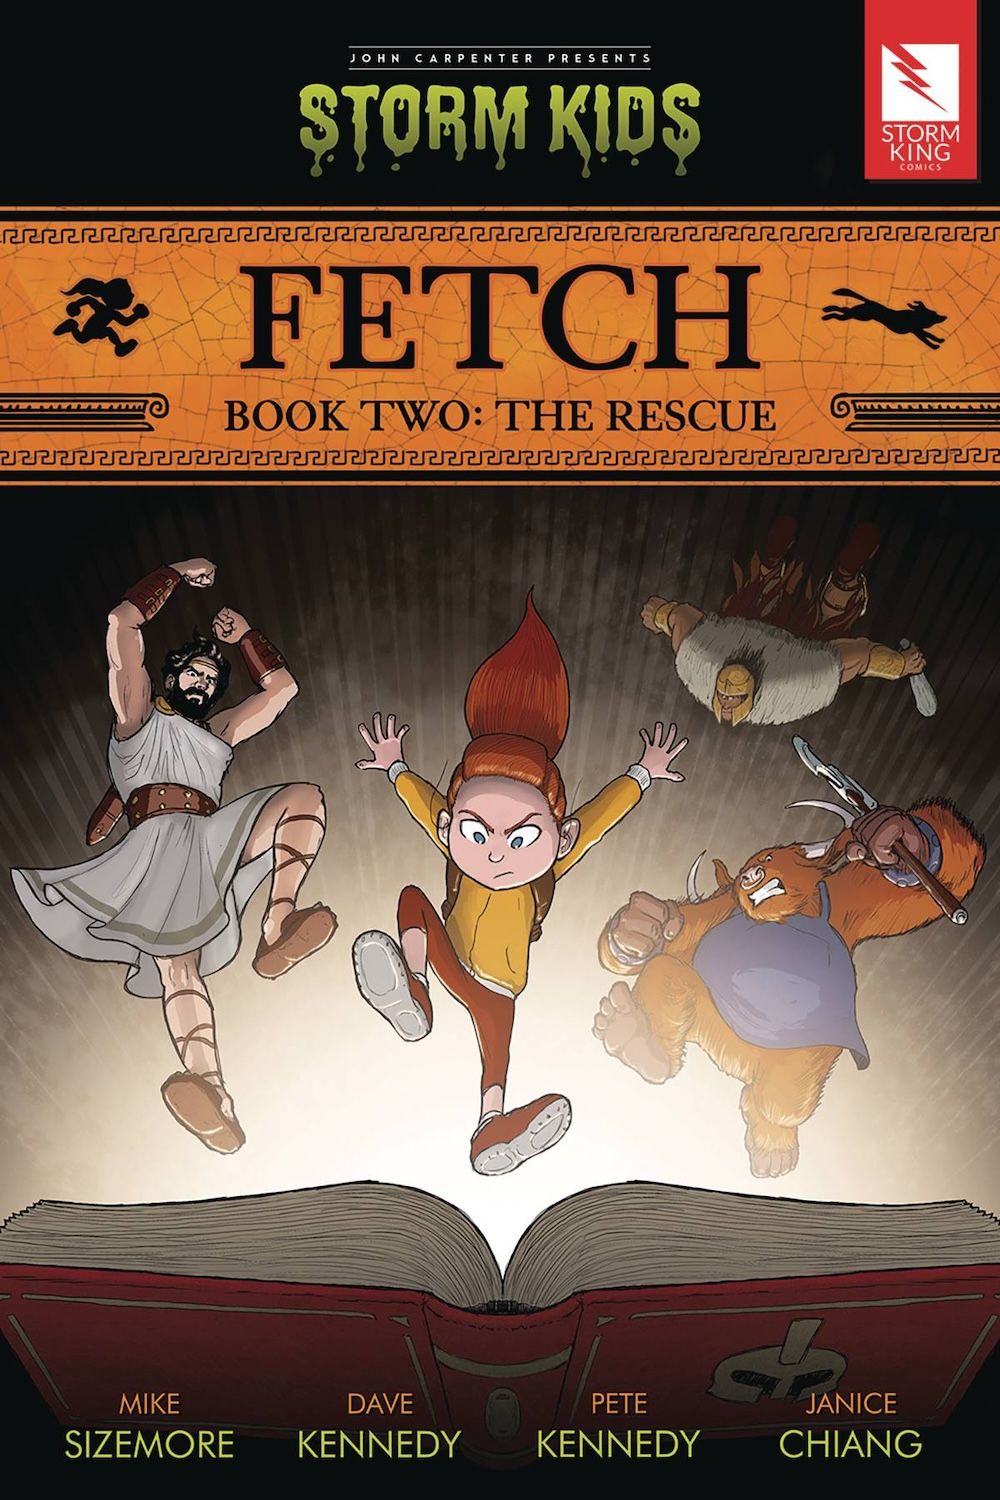 Odysseus, Danni, the Minotaur and Cyclops dive into a glowing book on Fetch, Book Two cover